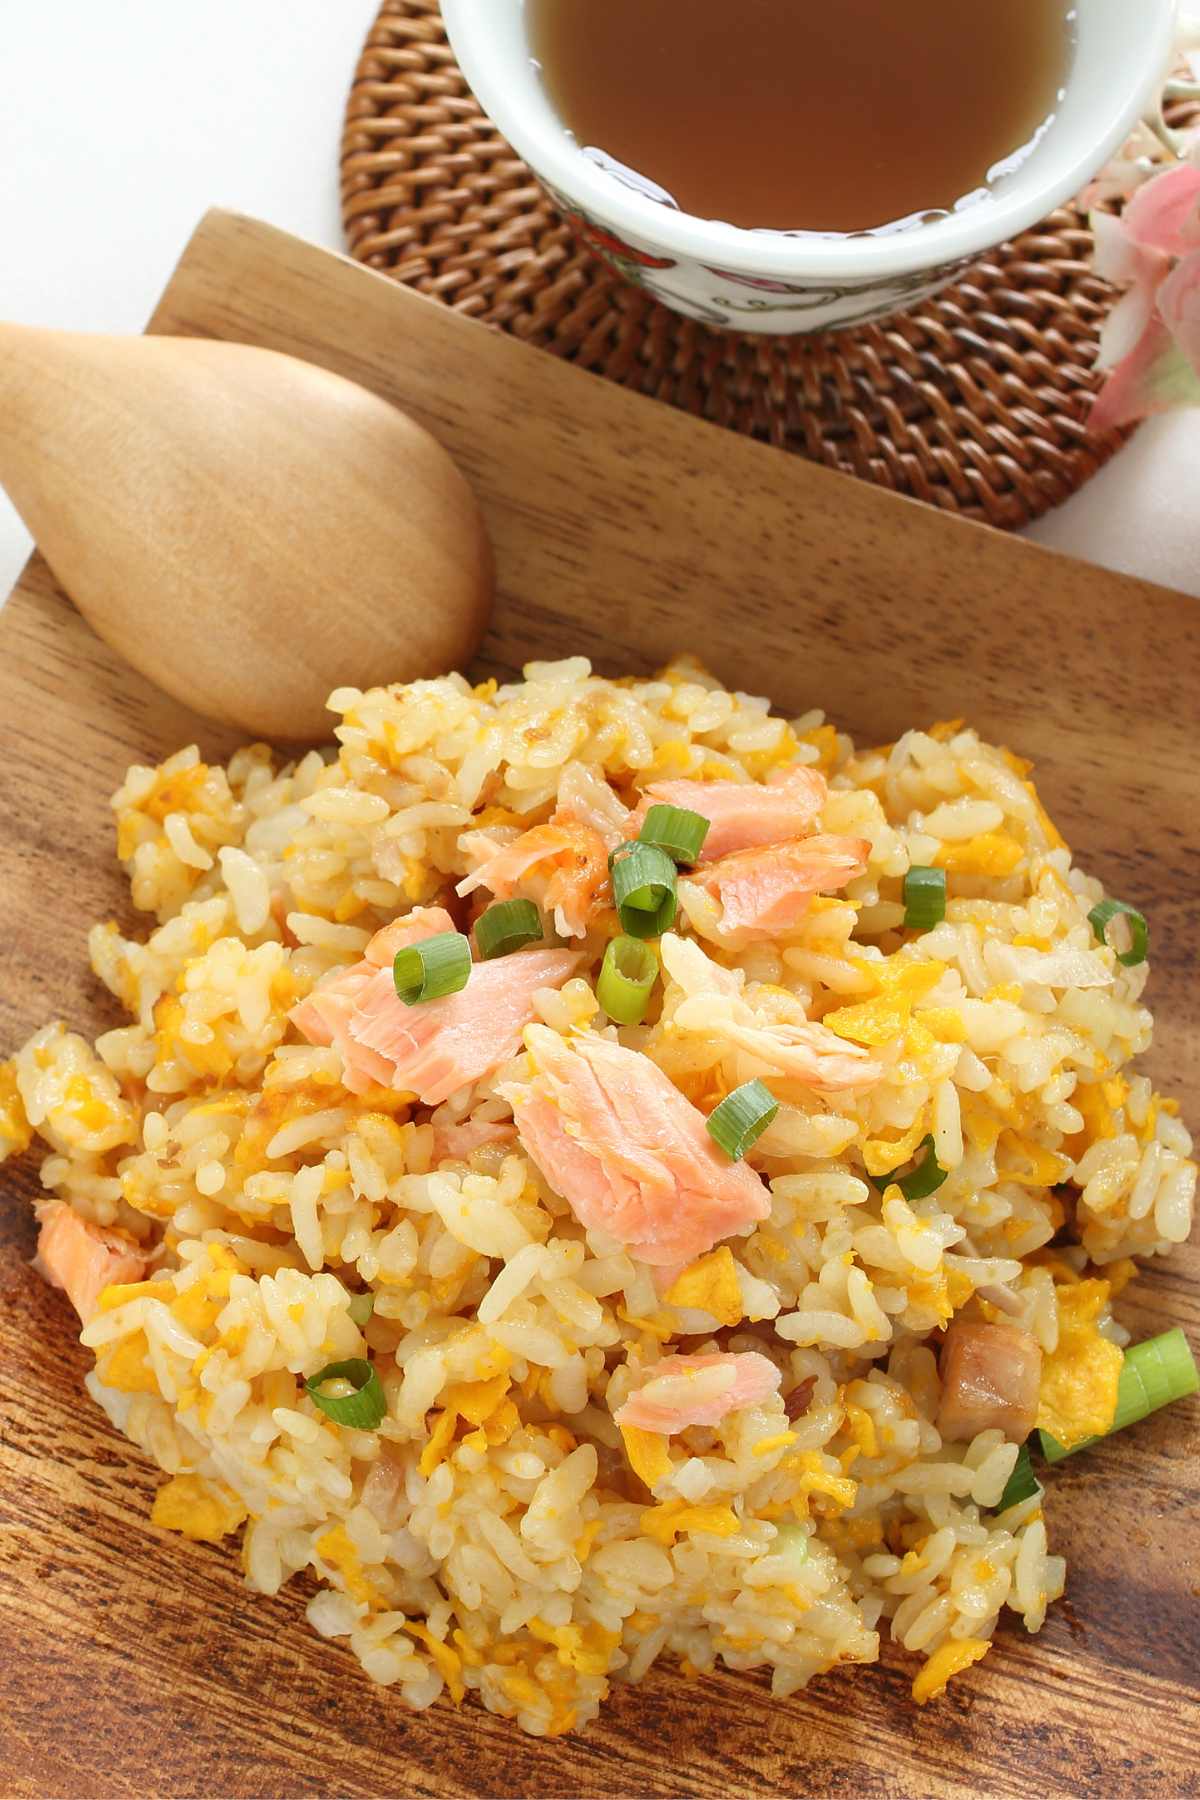 Got leftover rice from the night before? Perfect! This delicious Salmon and Rice Recipe combines leftover cooked rice and salmon to create a delicious fried rice dish with a twist!